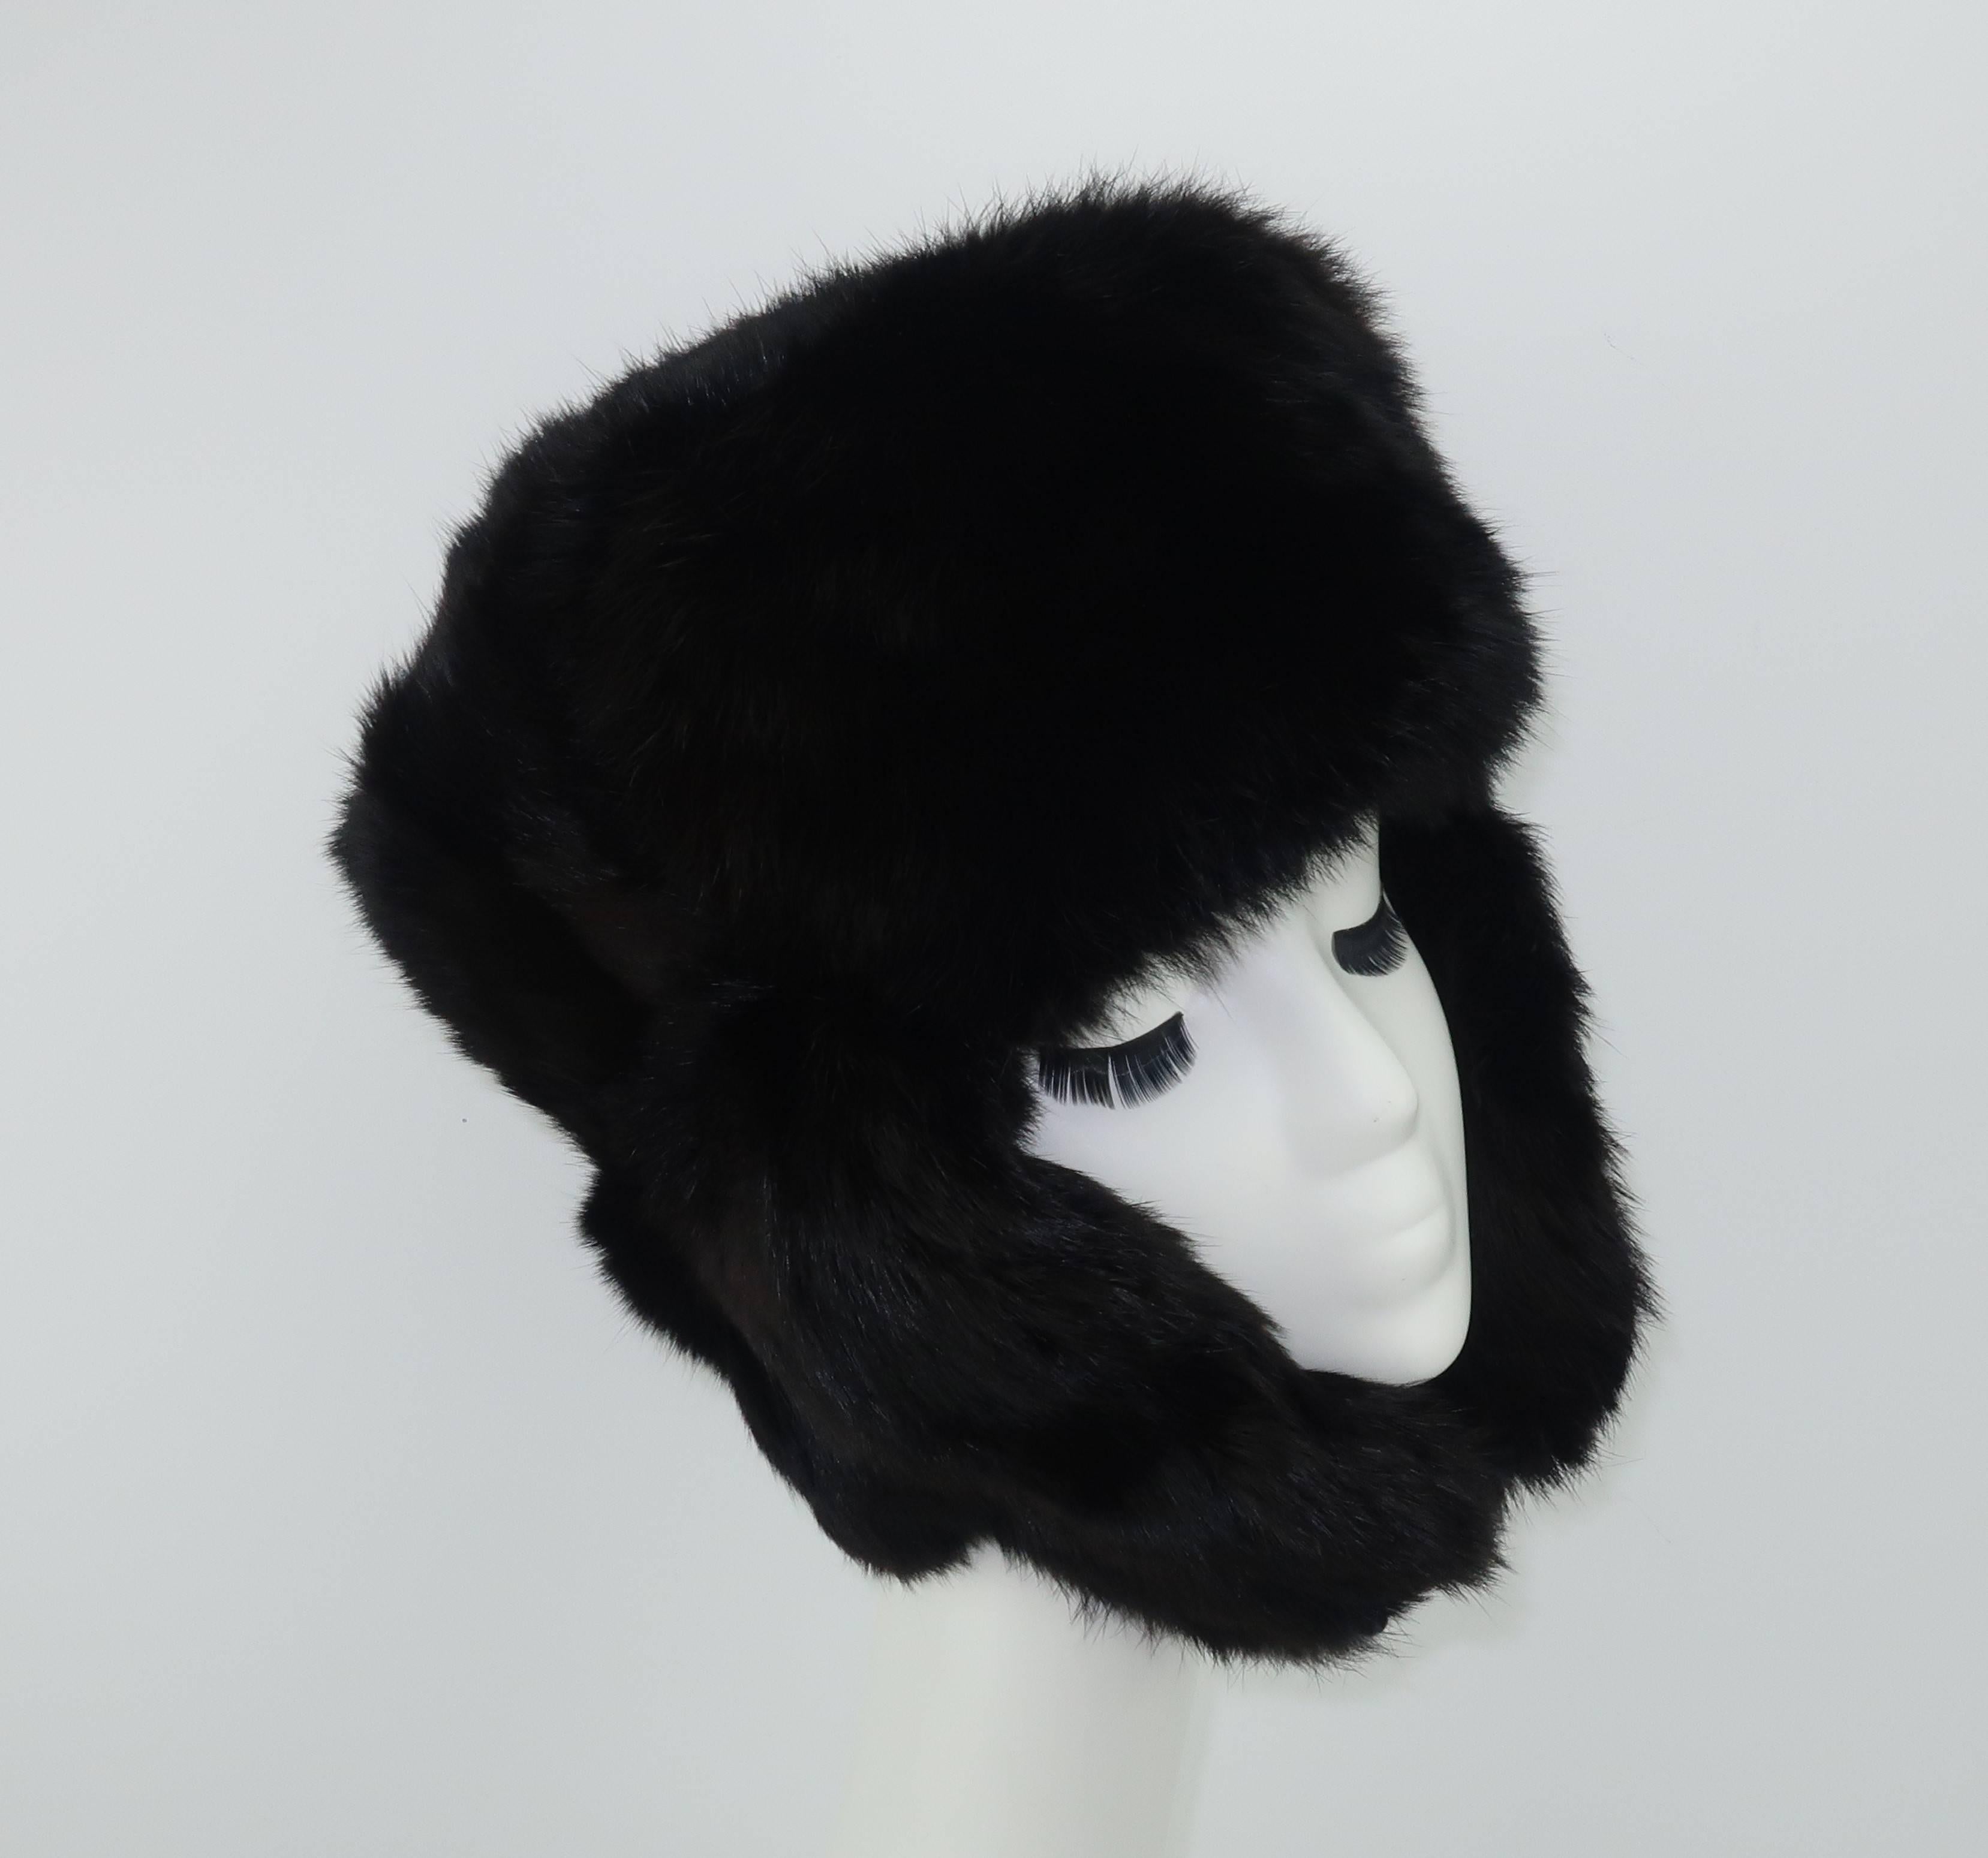 Women's Vintage Russian Sable Fur Hat With Ear Flaps